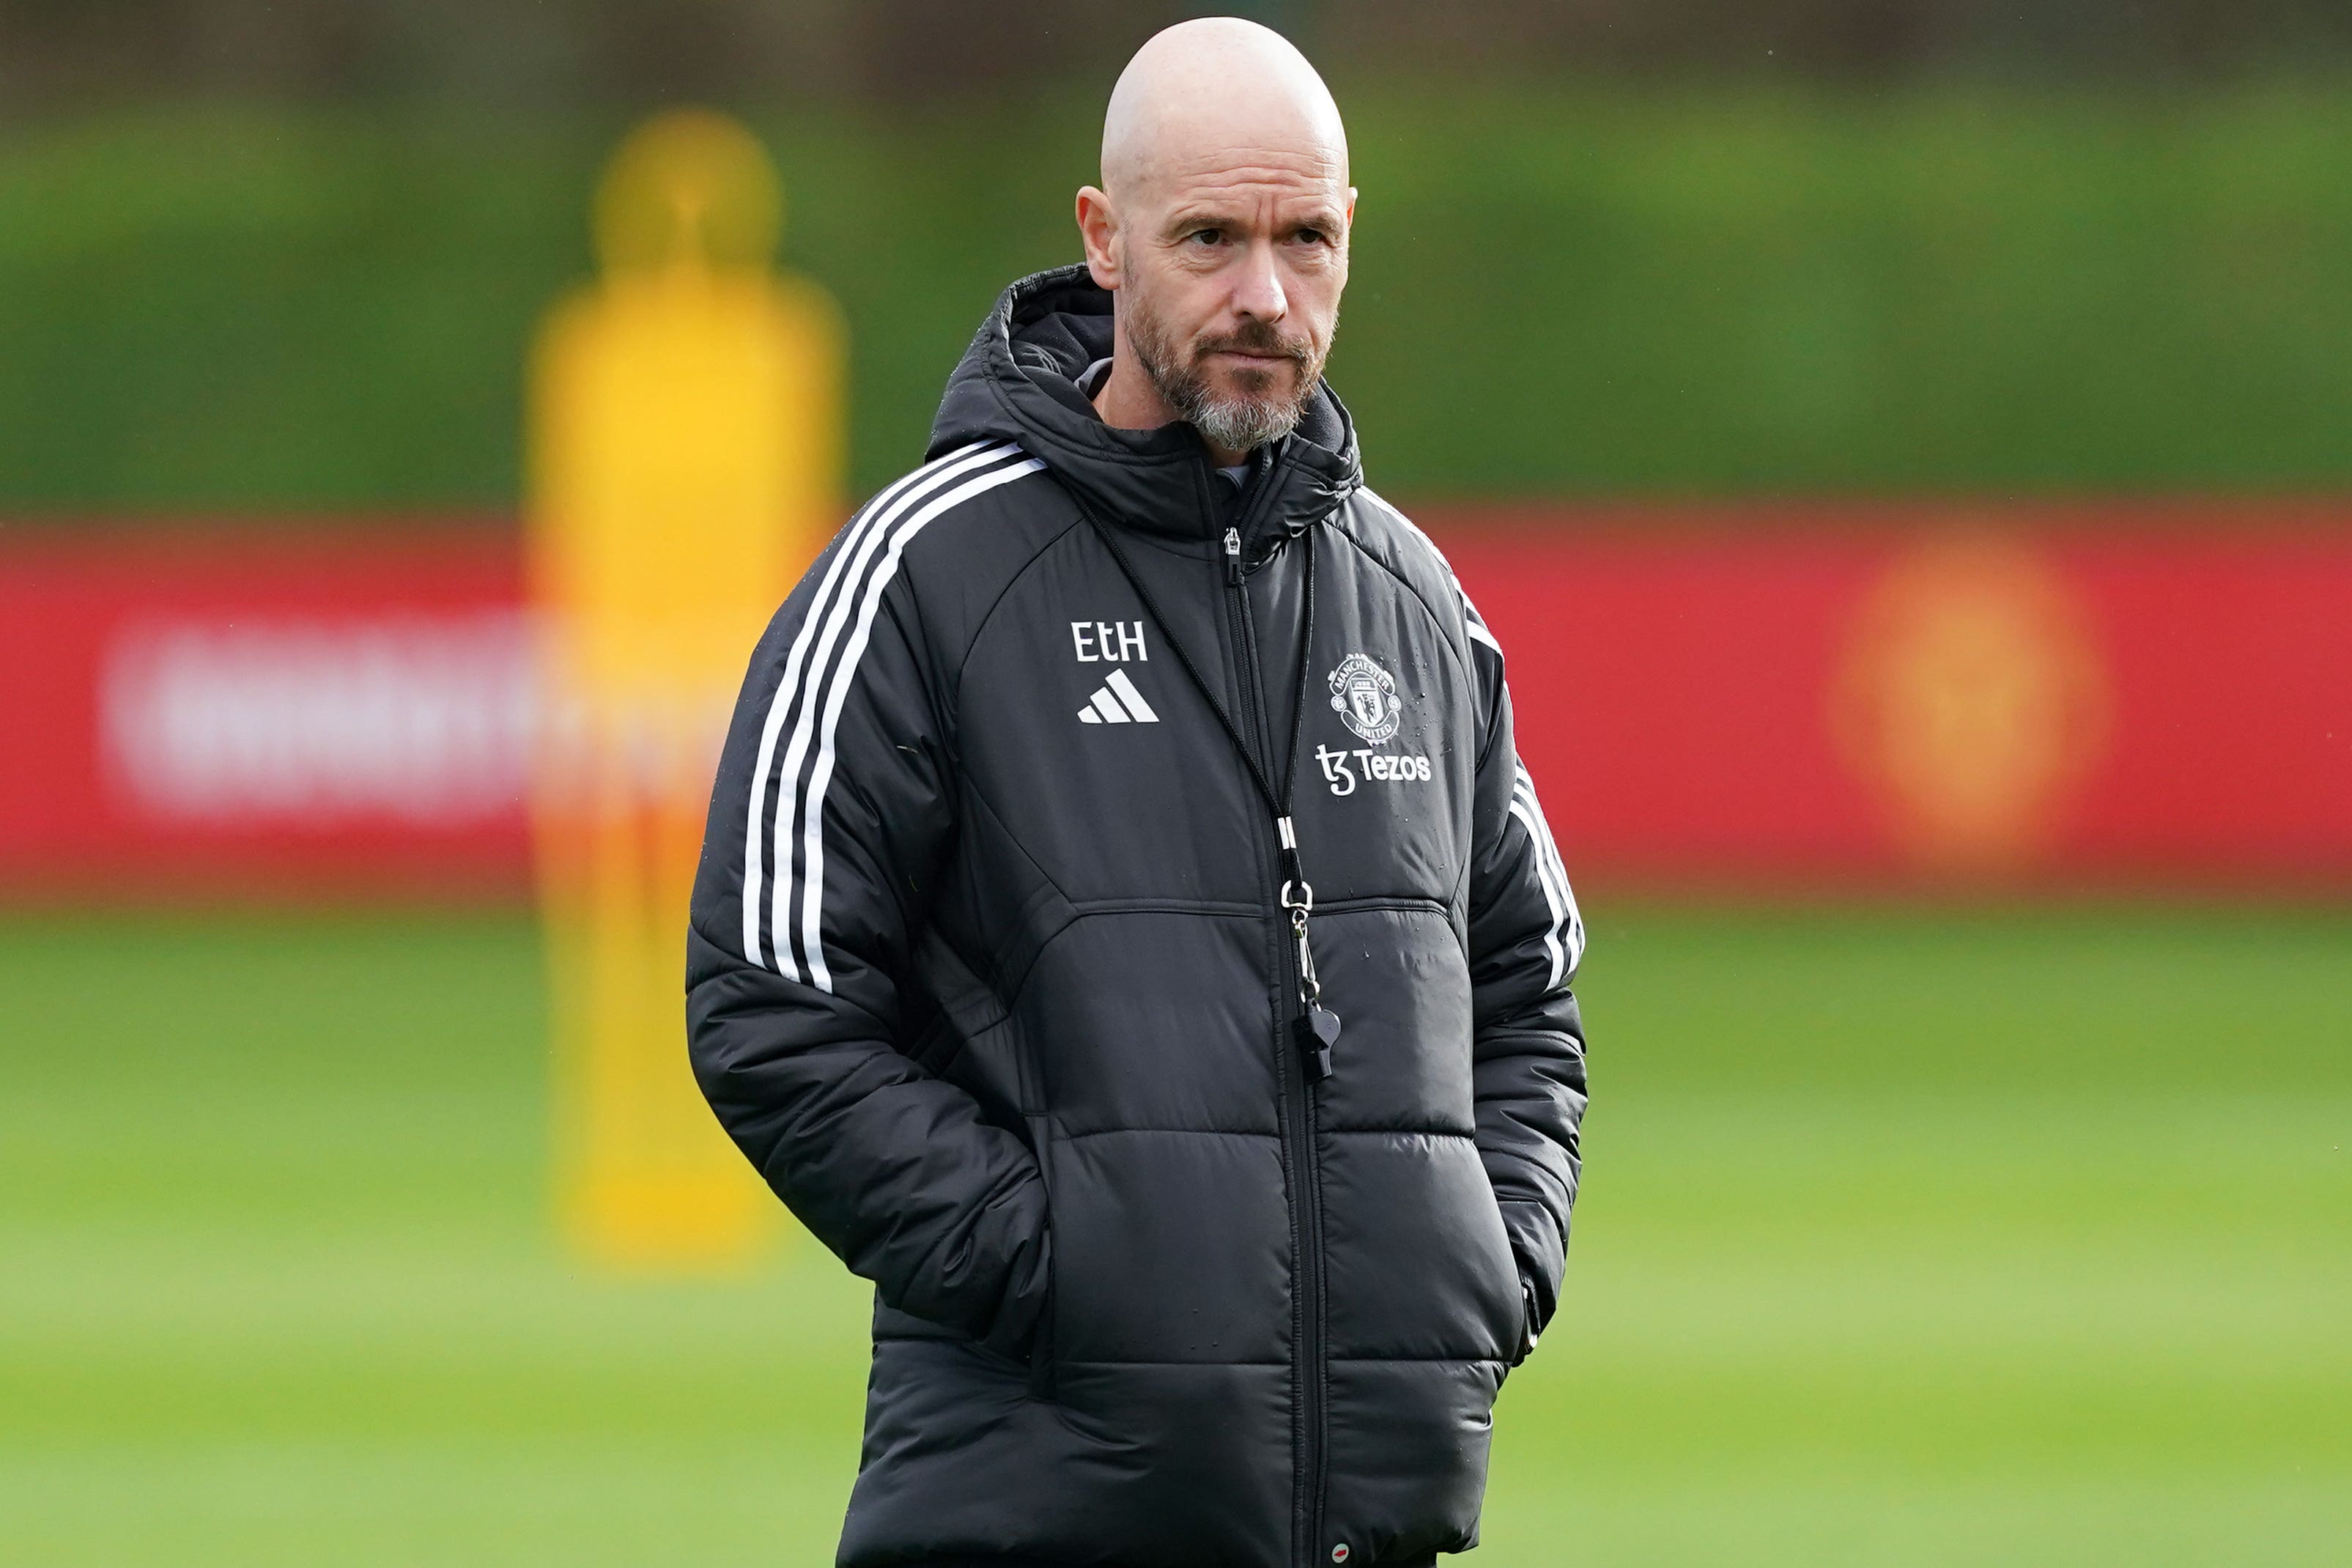 Erik ten Hag will not be on the touchline for his side’s match against Everton (Martin Rickett/PA)